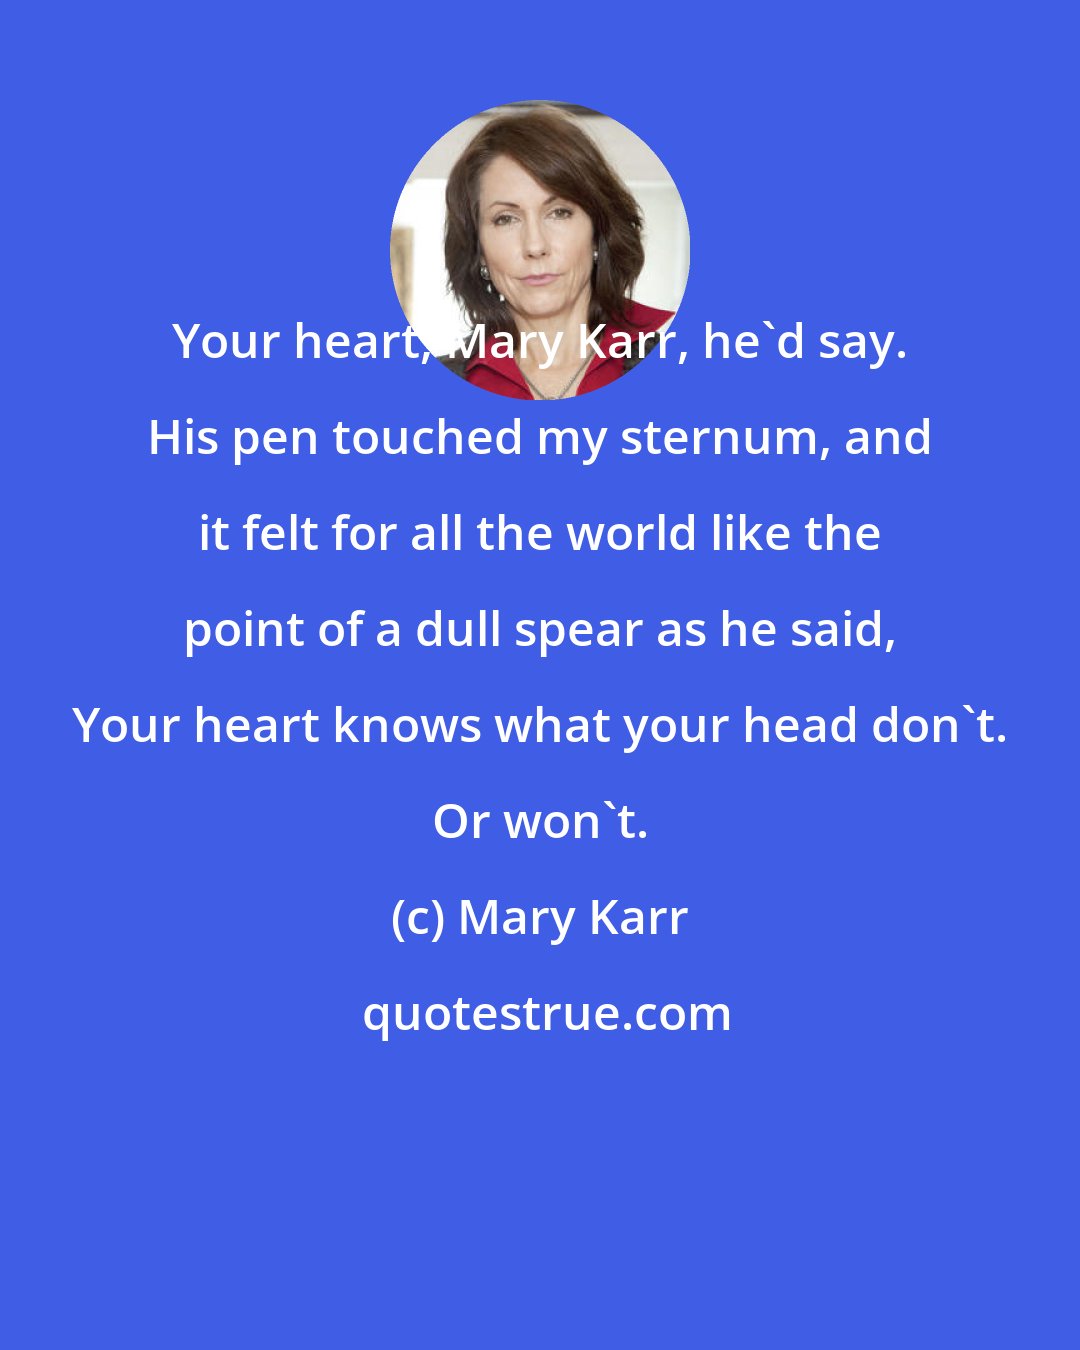 Mary Karr: Your heart, Mary Karr, he'd say. His pen touched my sternum, and it felt for all the world like the point of a dull spear as he said, Your heart knows what your head don't. Or won't.